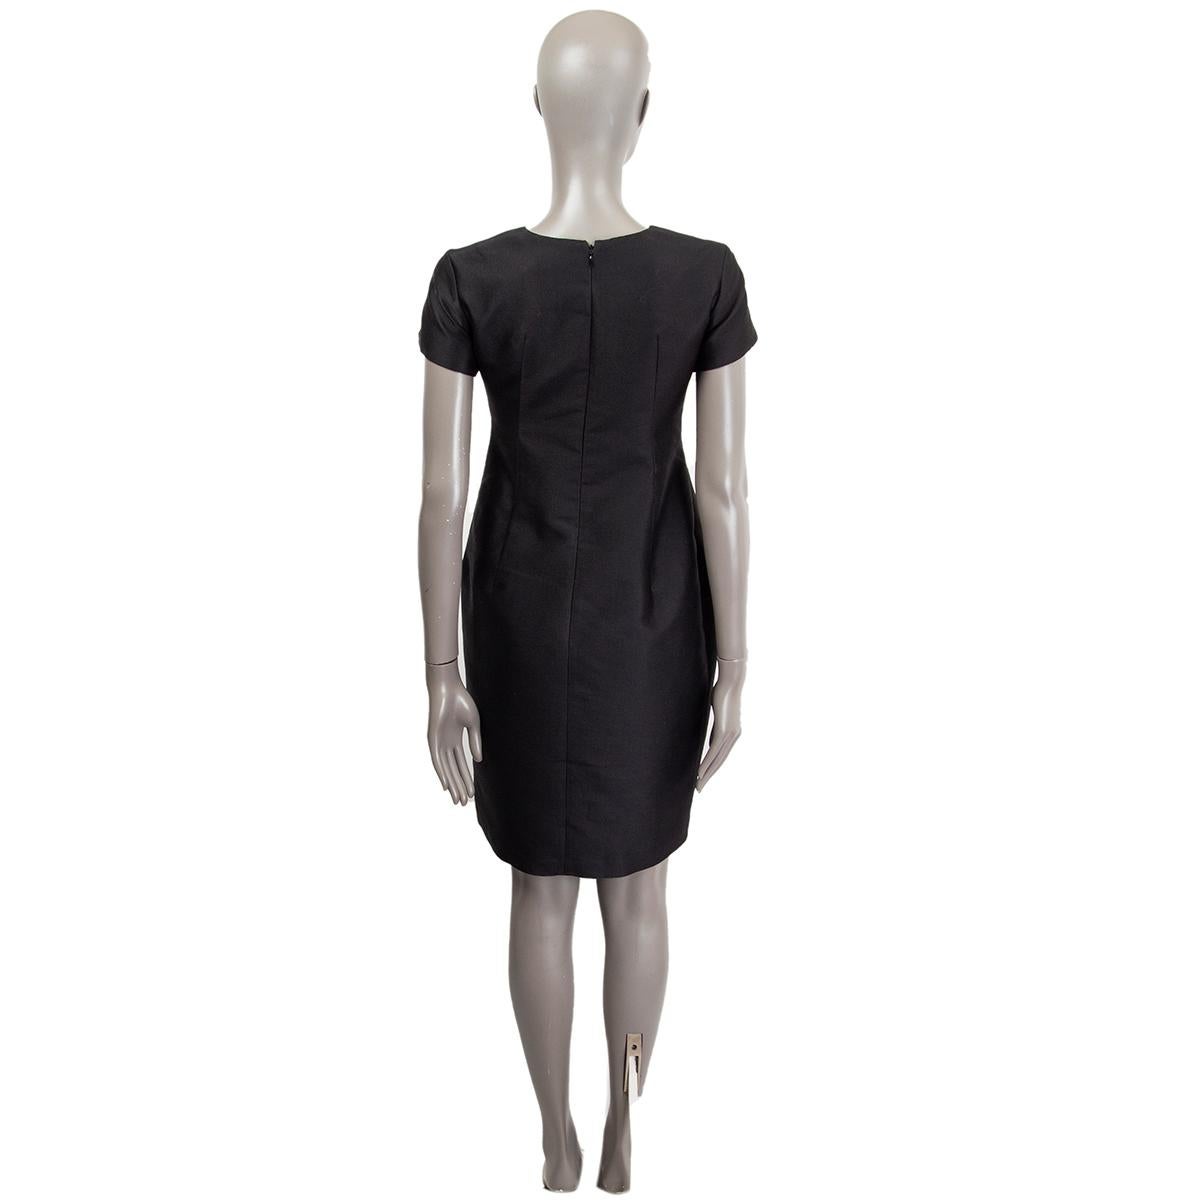 JIL SANDER black wool blend STRUCTURED SHORT SLEEVE Dress 34 XS In Excellent Condition For Sale In Zürich, CH